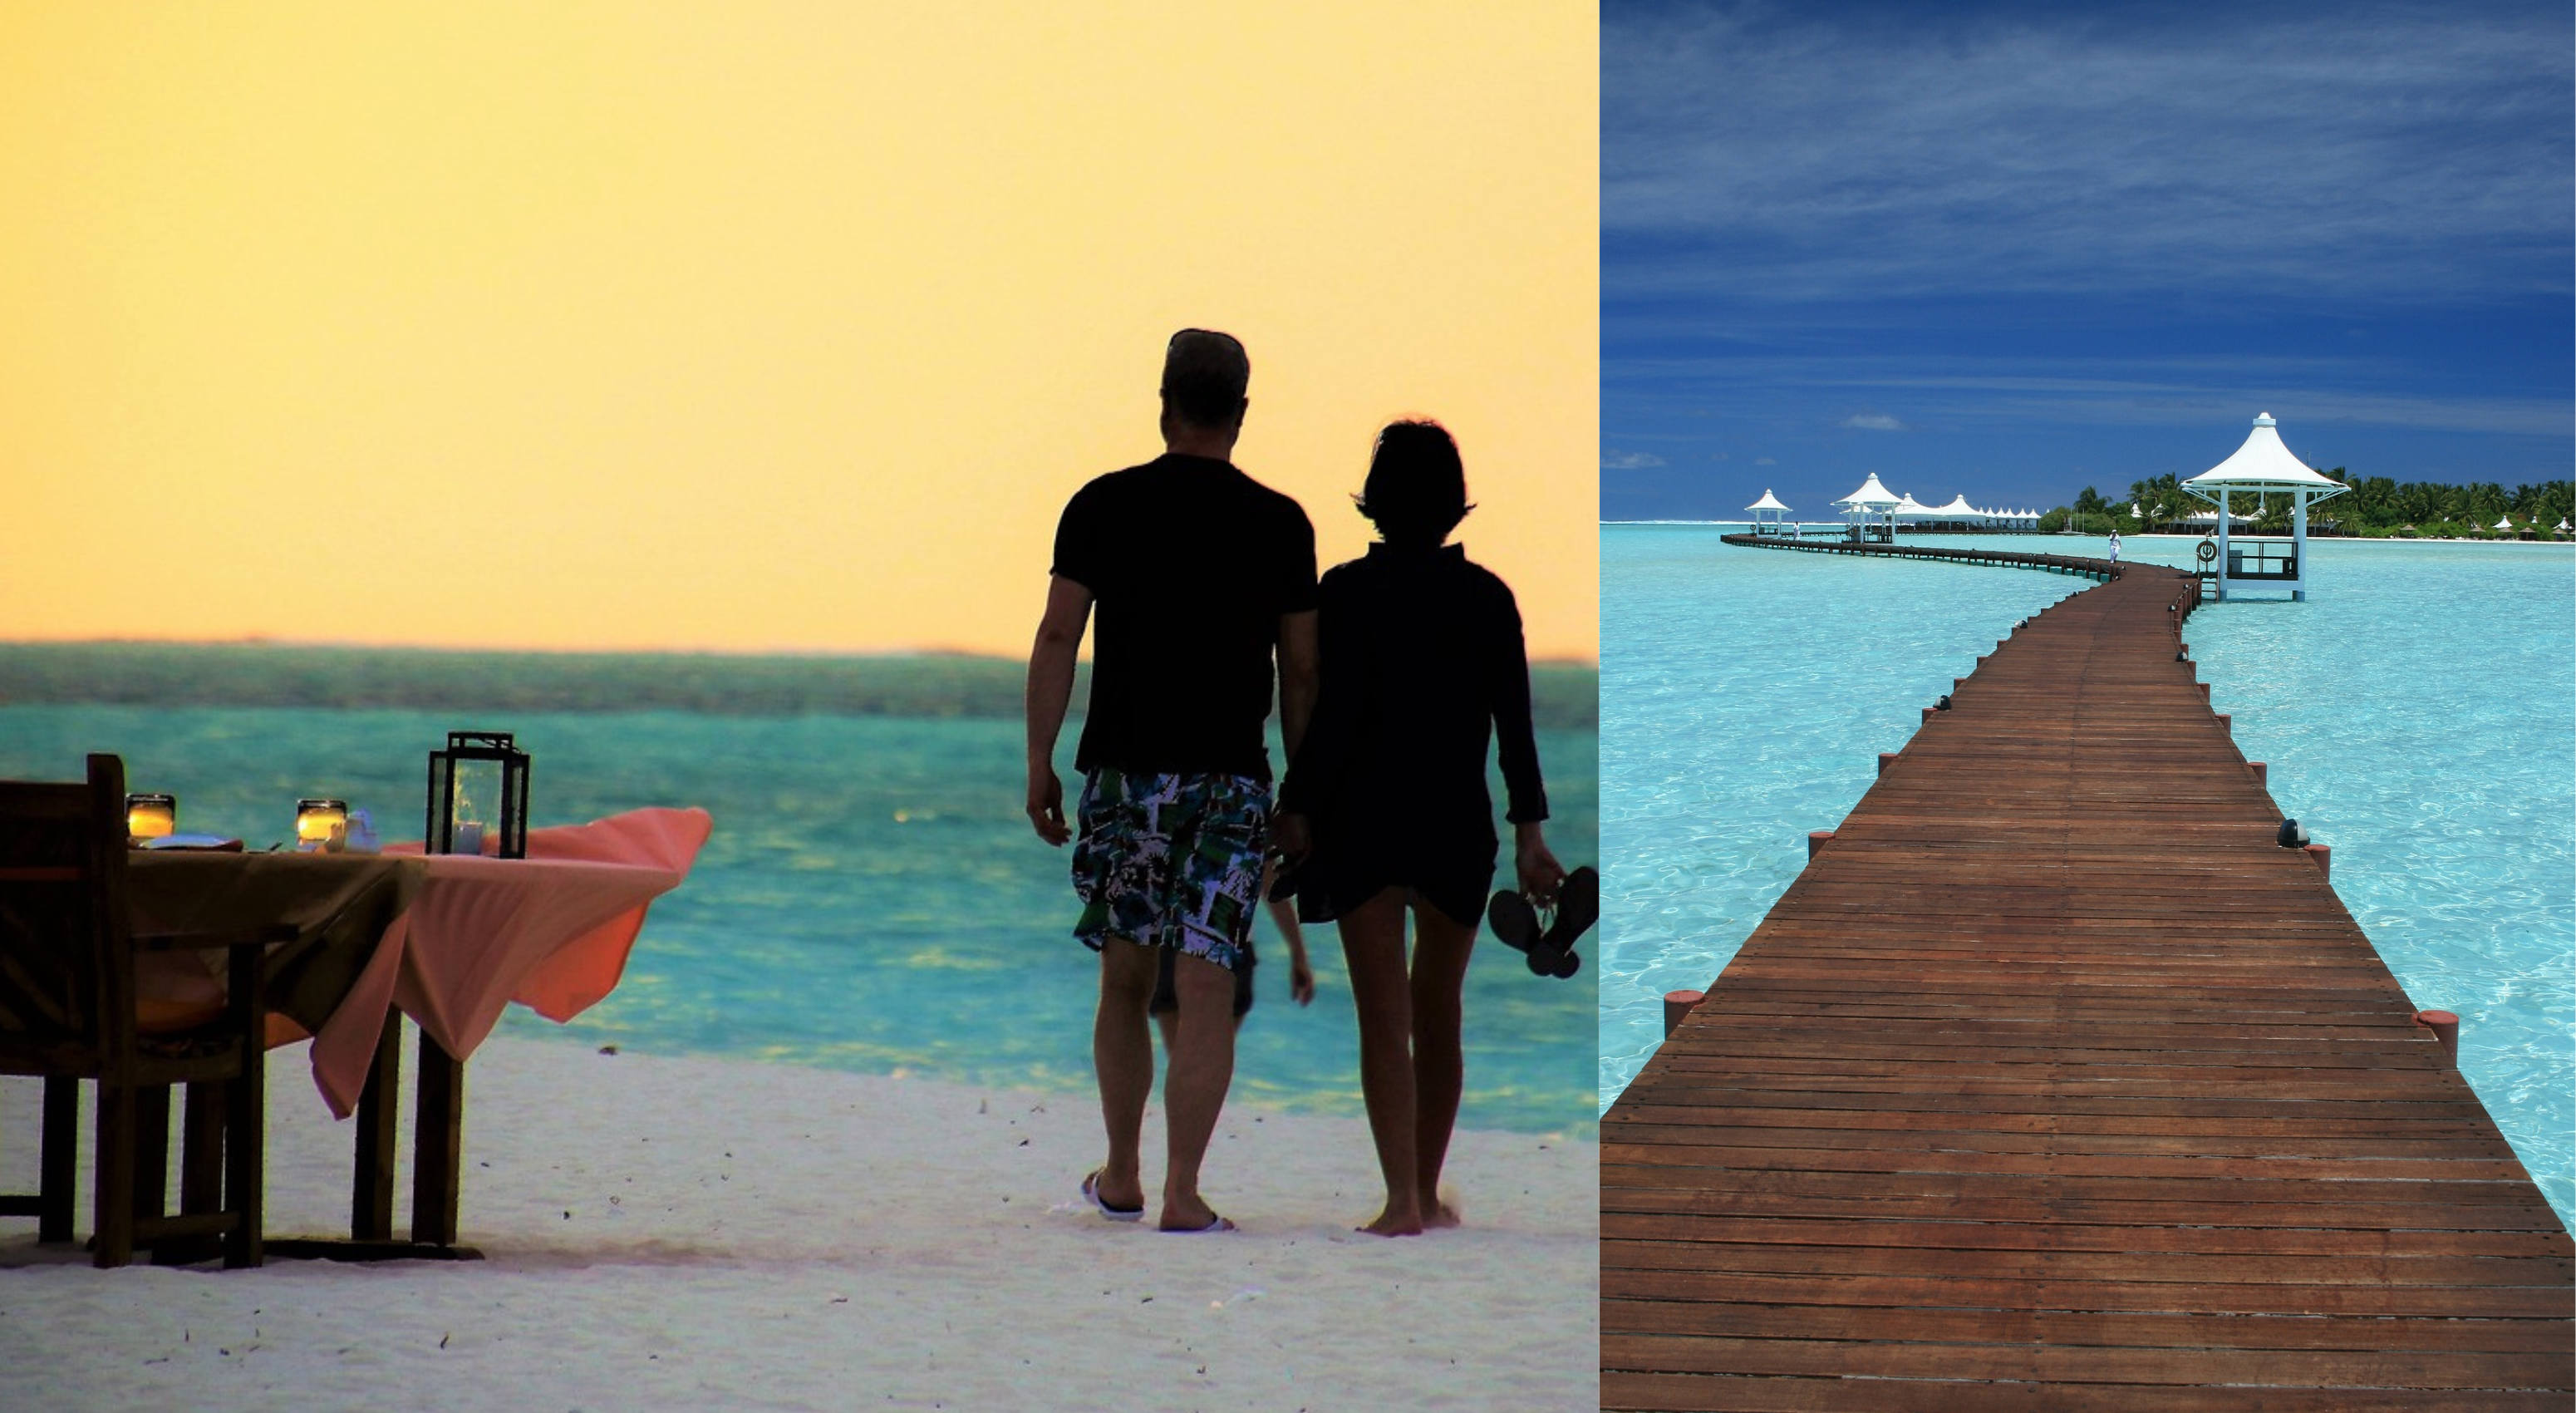 beach of maldives and couple walking in Top 7 Travel Destinations in the World That Offer Visa Free Entry for Indians - Maldives